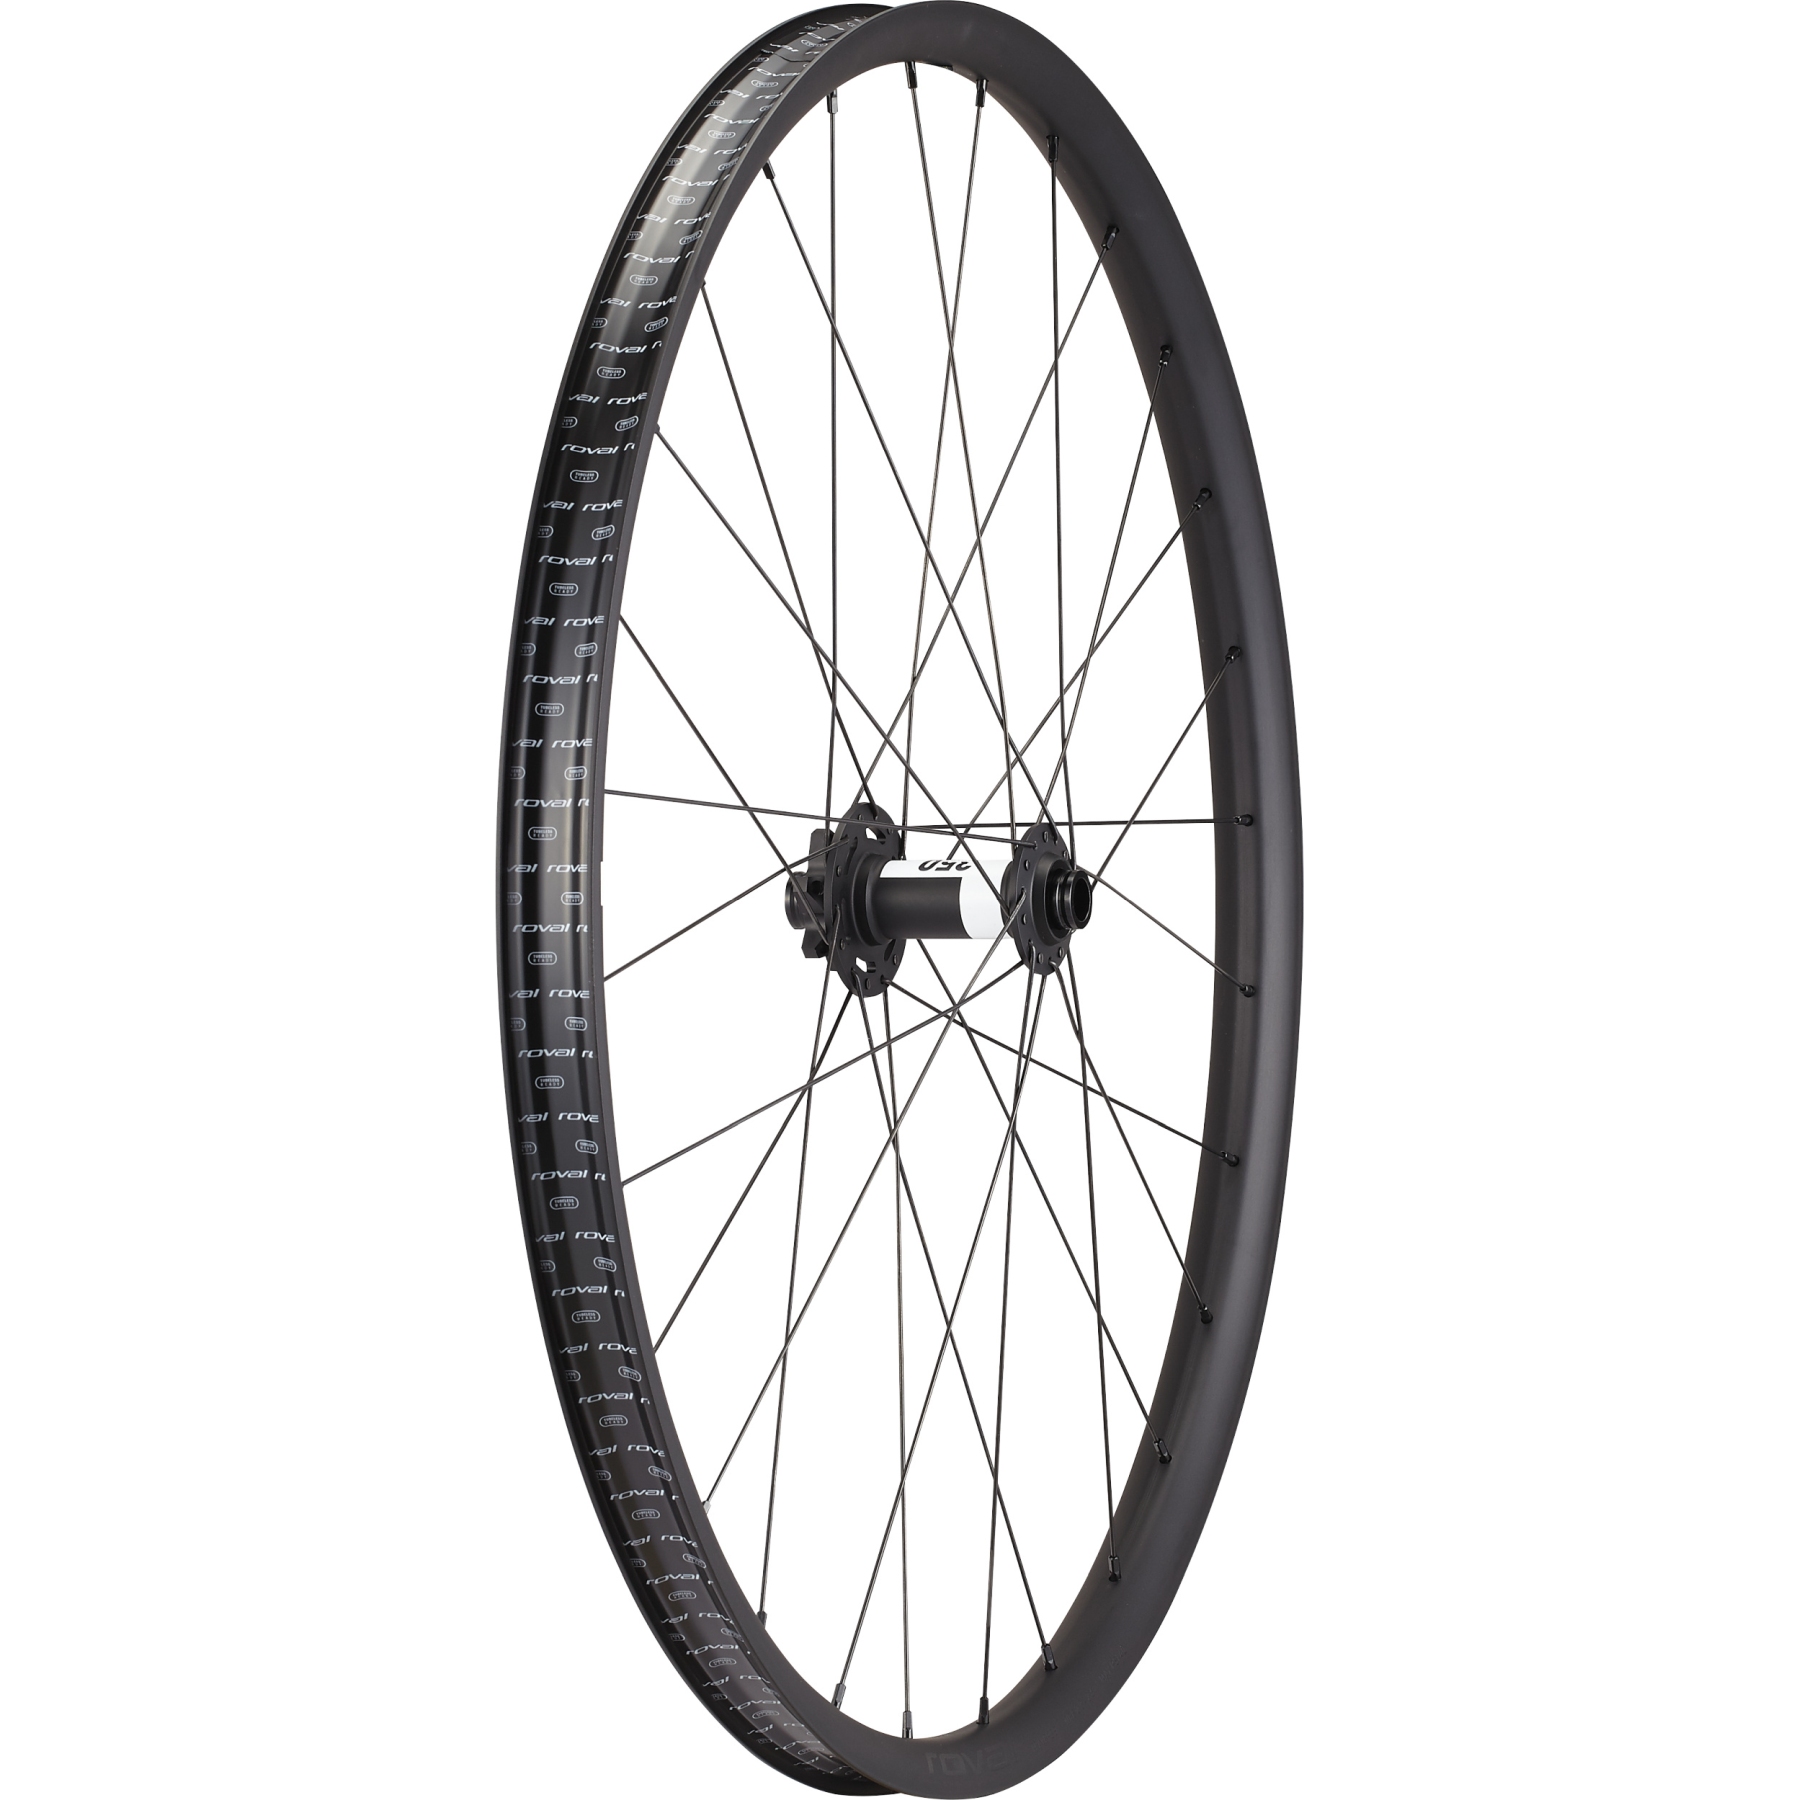 Productfoto van Specialized Roval Traverse 350 Alloy Voorwiel - 29&quot; | 6-Bolt | 15x110mm - Black/Charcoal